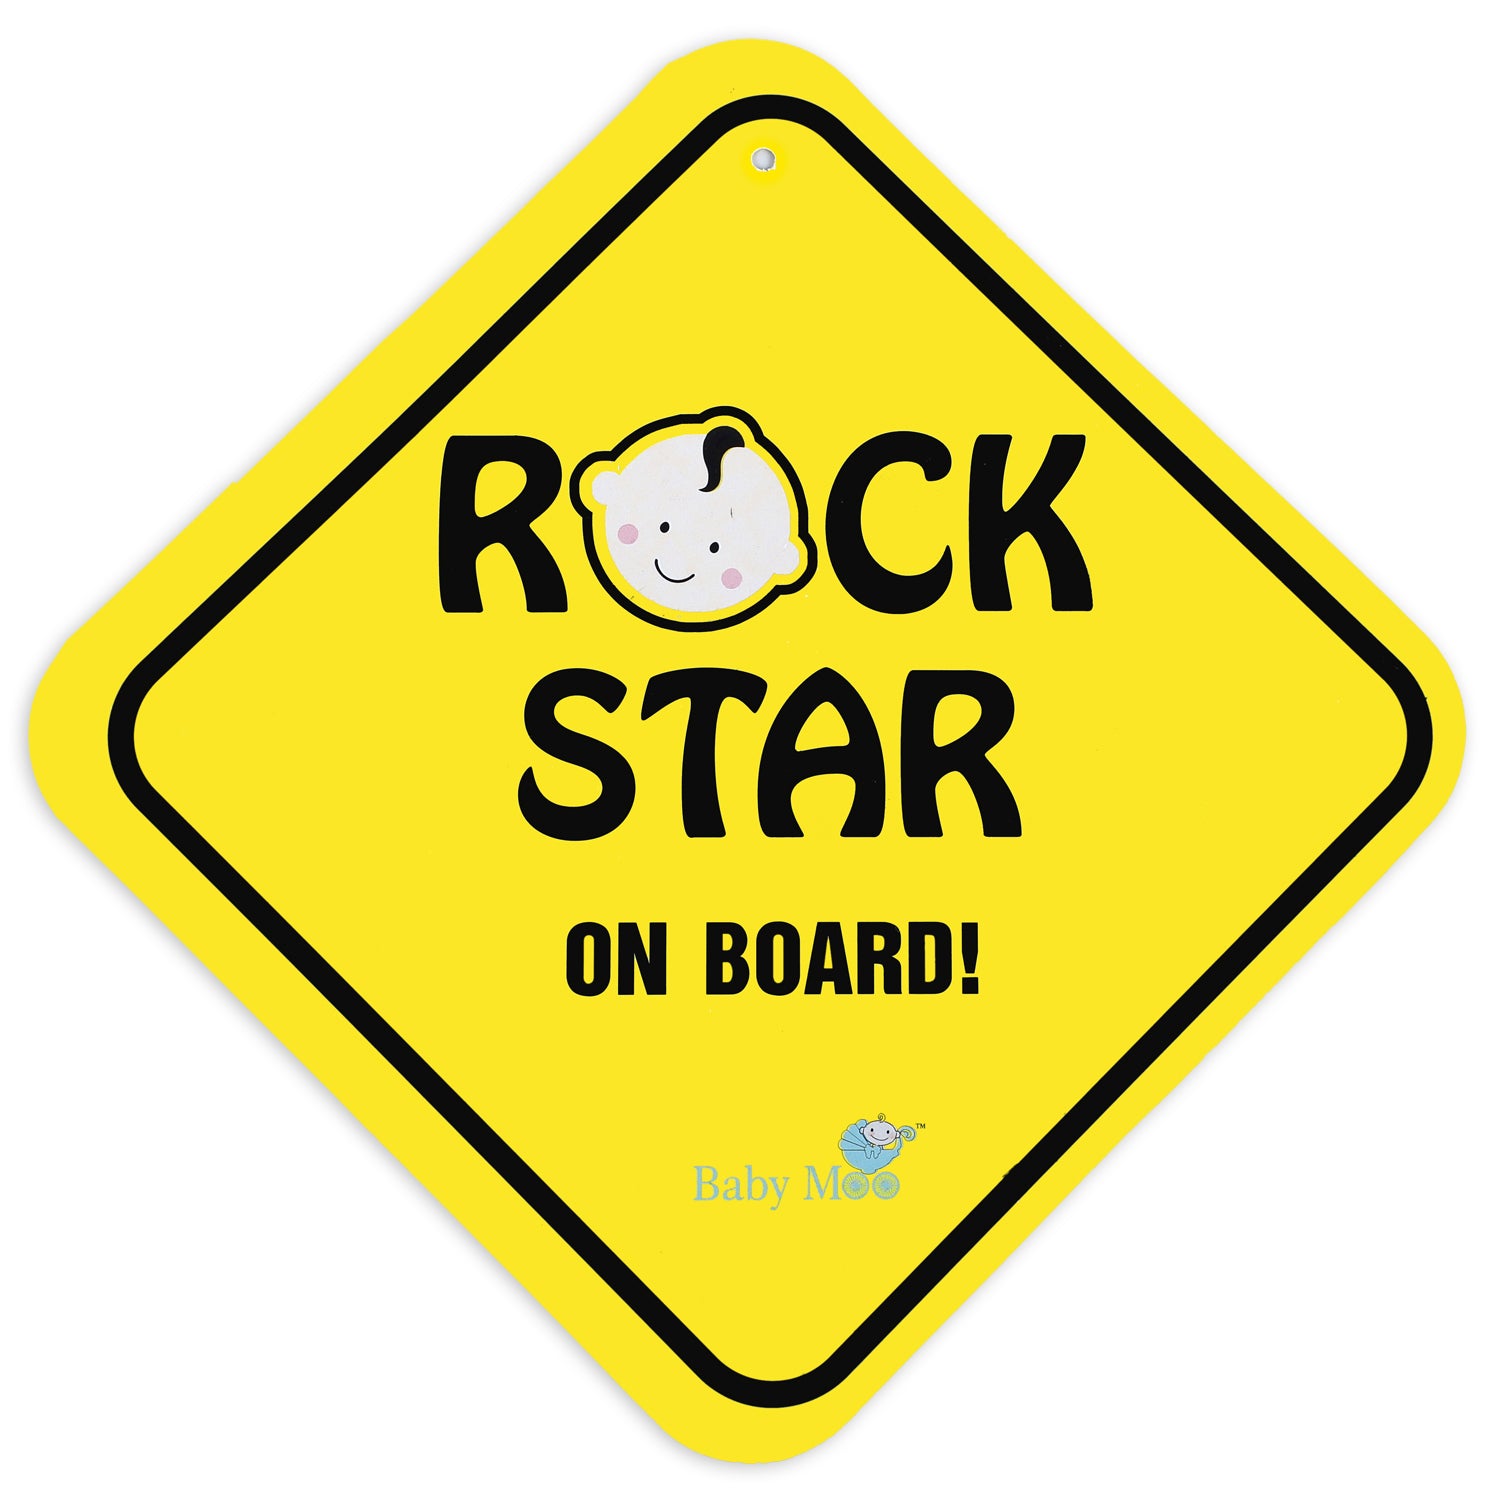 Baby Moo Rock Star on Board Car Safety Sign With Vacuum Suction Cup Clip - Yellow - Baby Moo